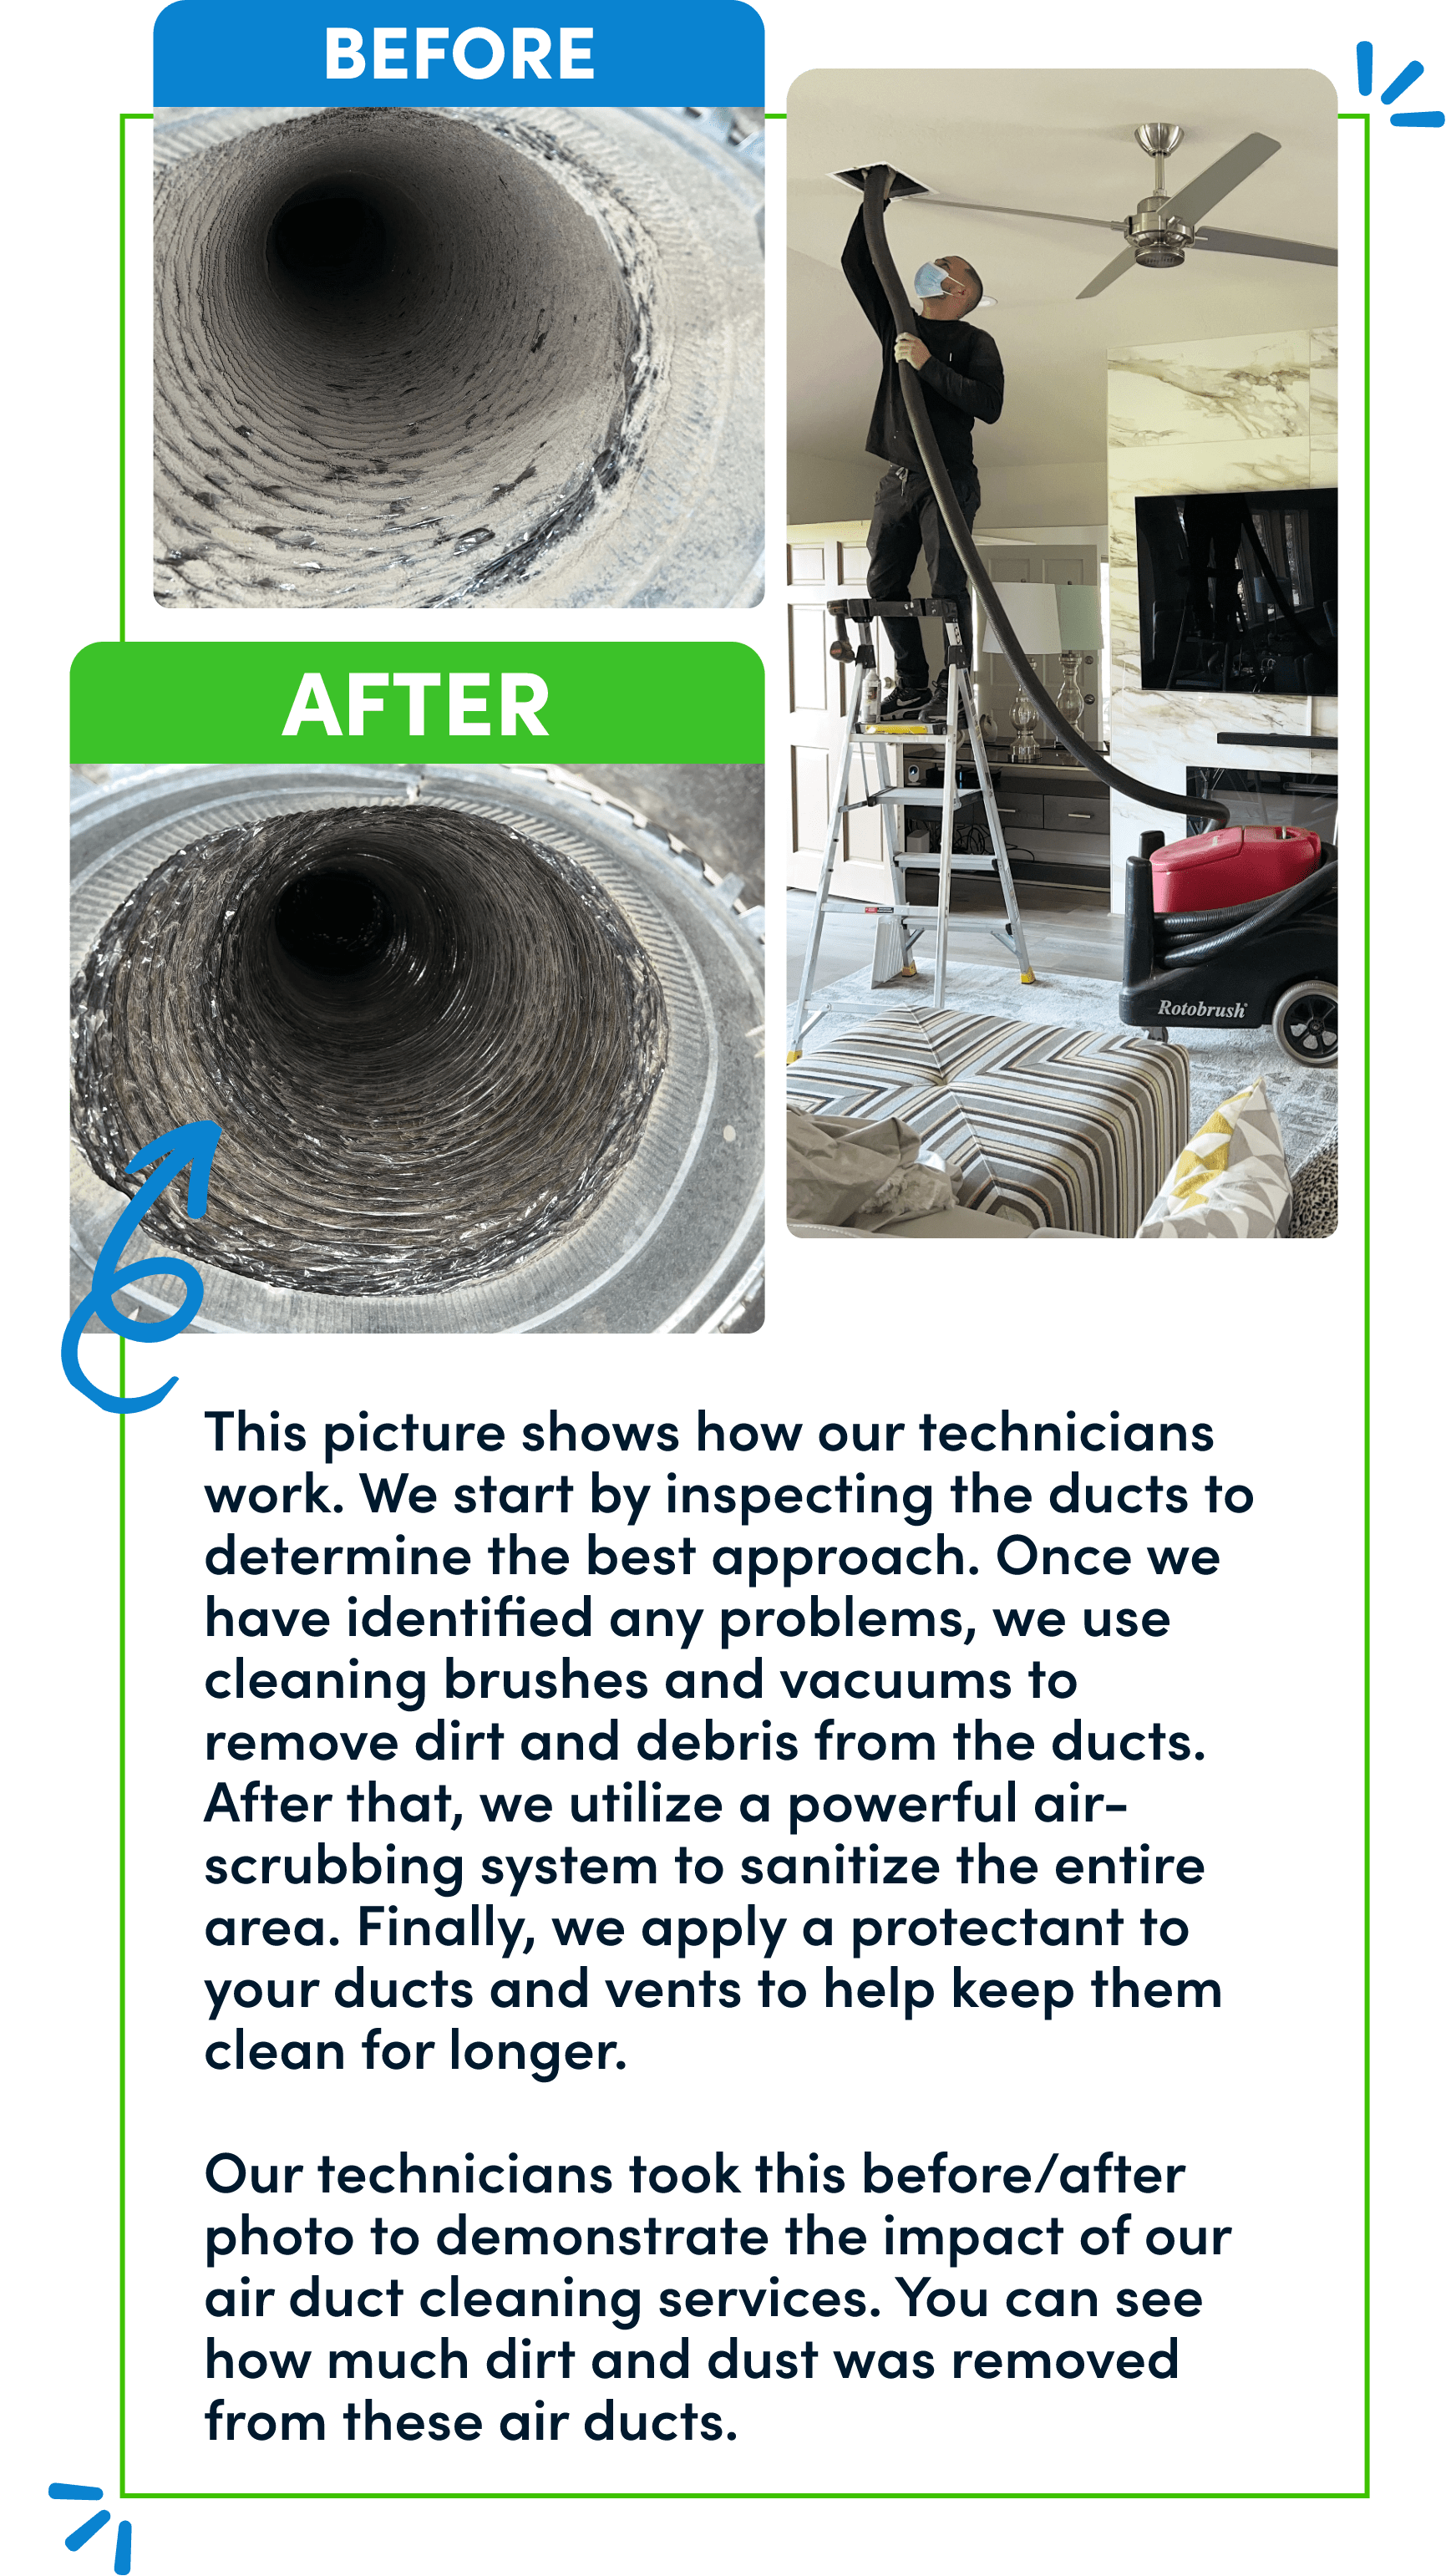 Before and after photo of air duct cleaning service in Houston, Texas.